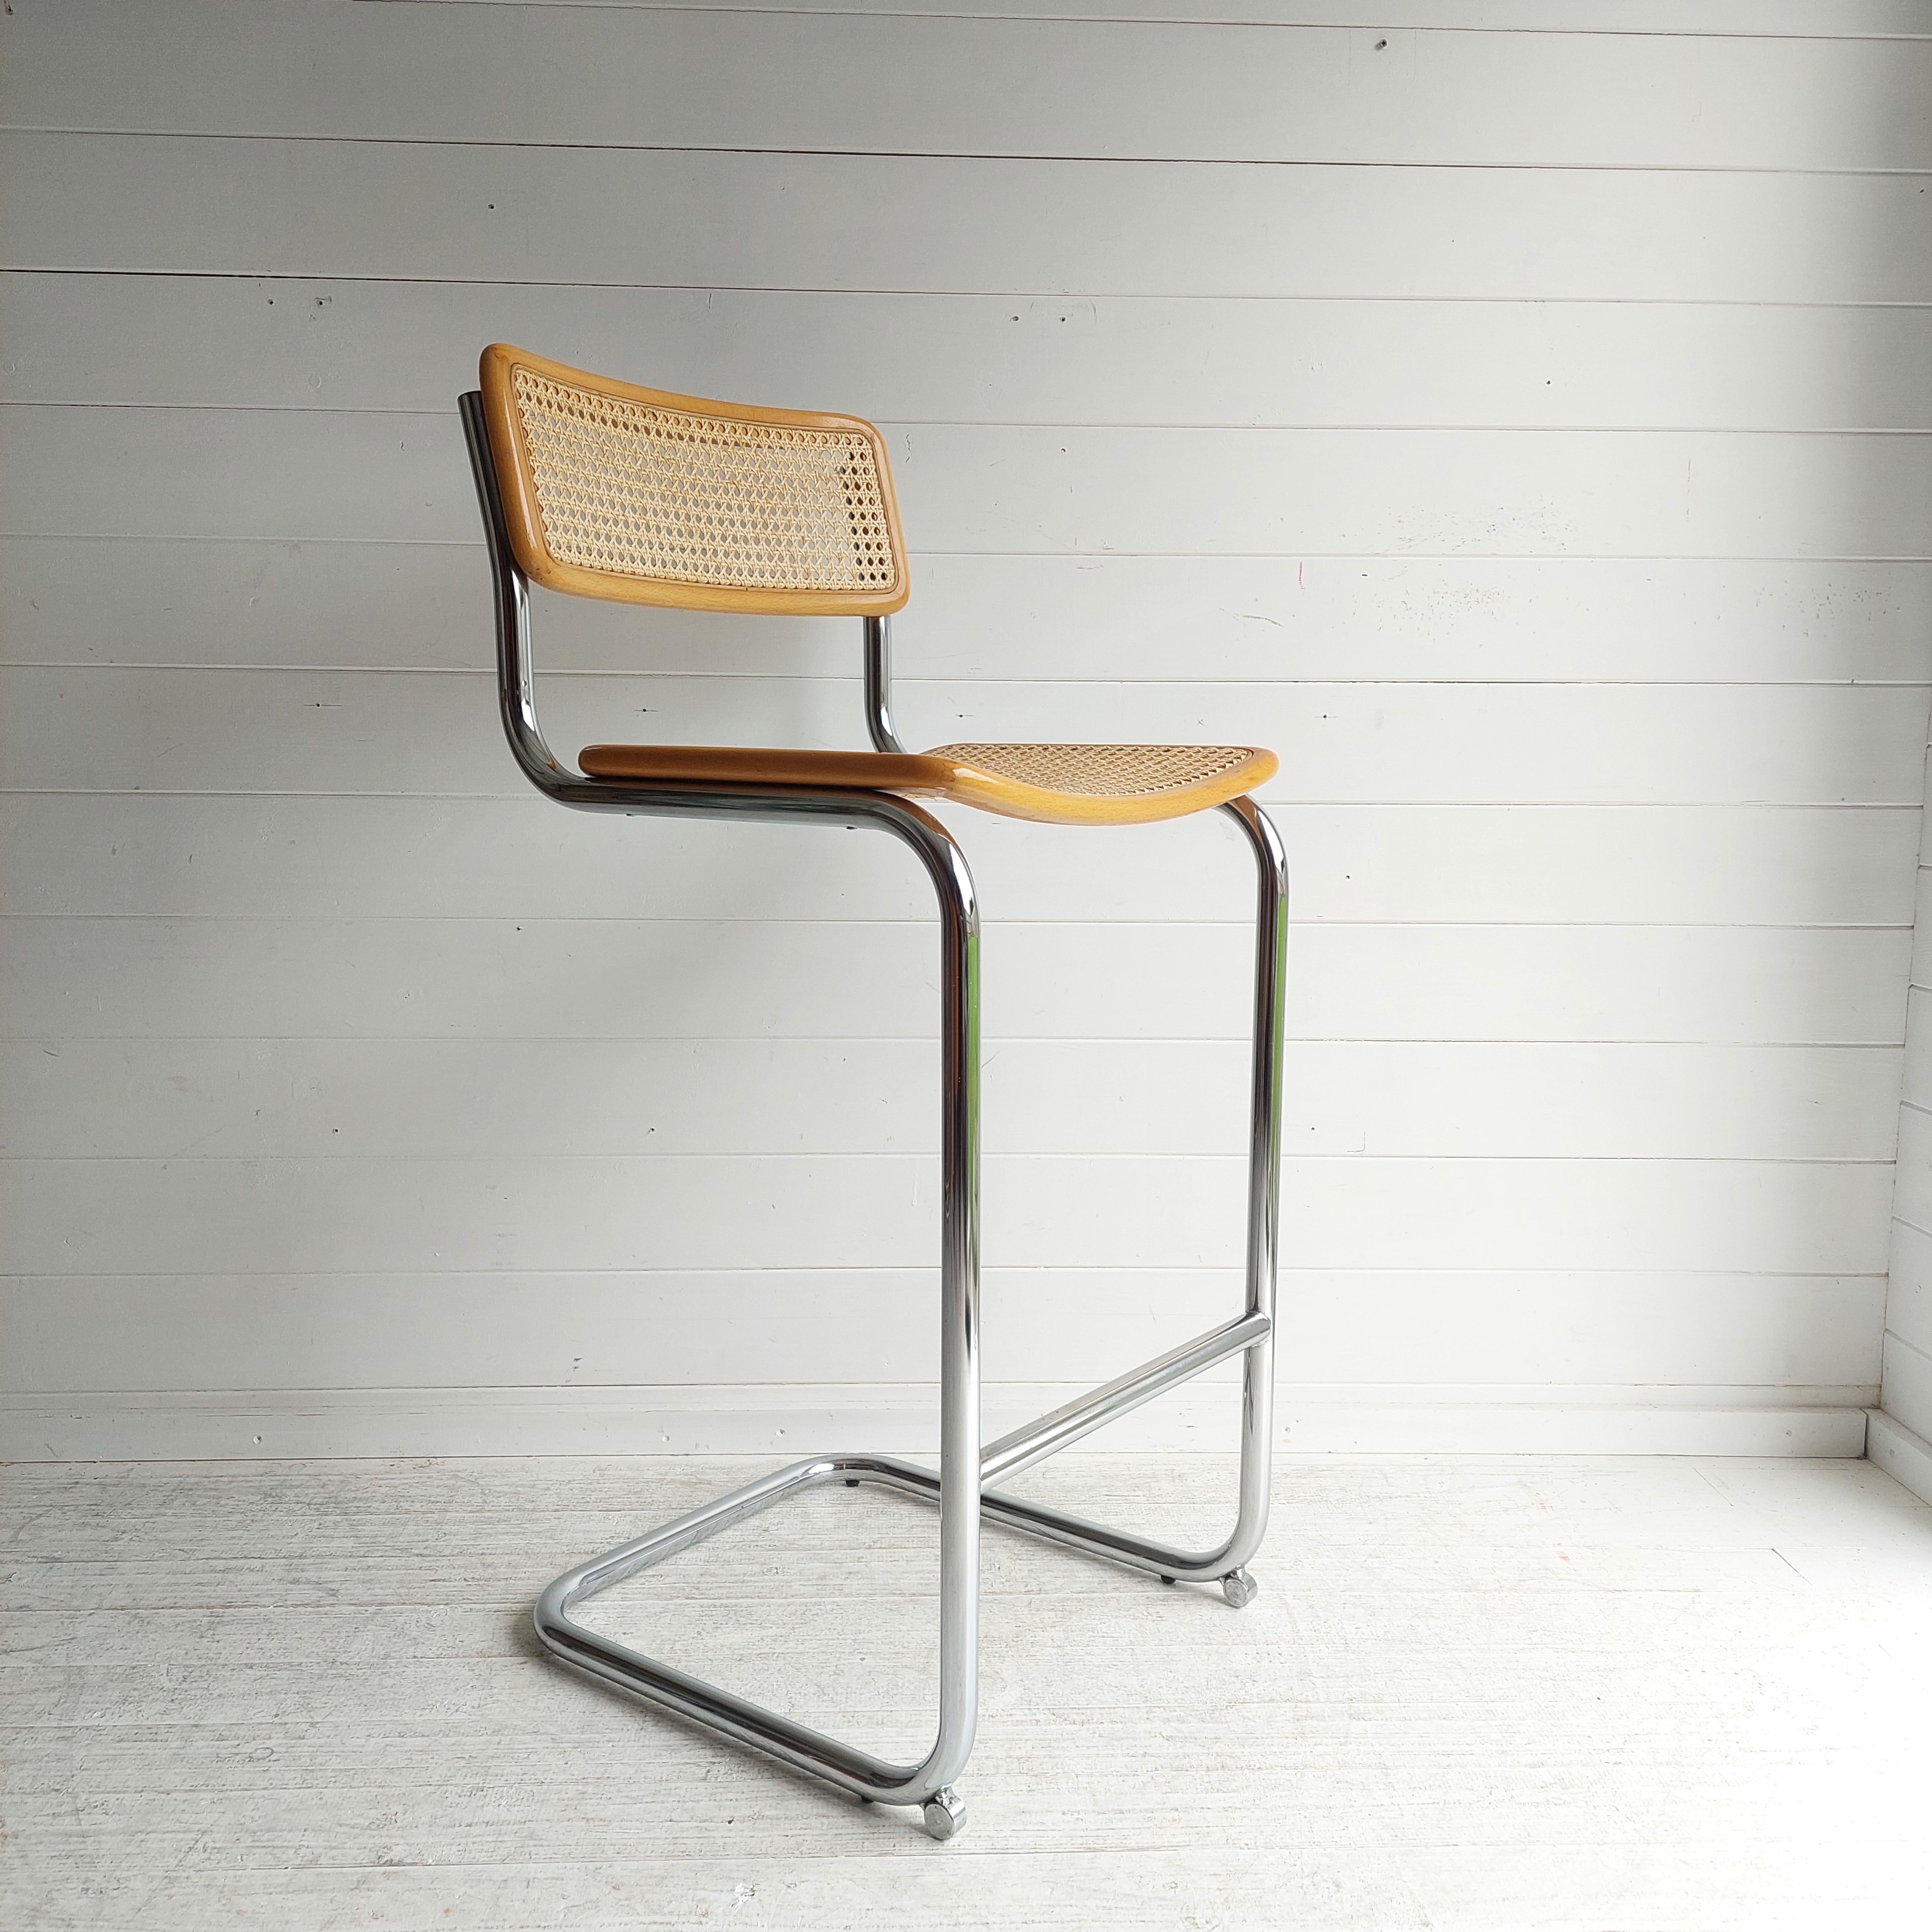 A stylish mid century Cesca bar stool originally designed by Marcel Breuer for Knoll International.
Model S32 made in Italy 70s

The Cesca was originally designed in 1928, after Breuer had perfected his personal style in the Bauhaus carpentry